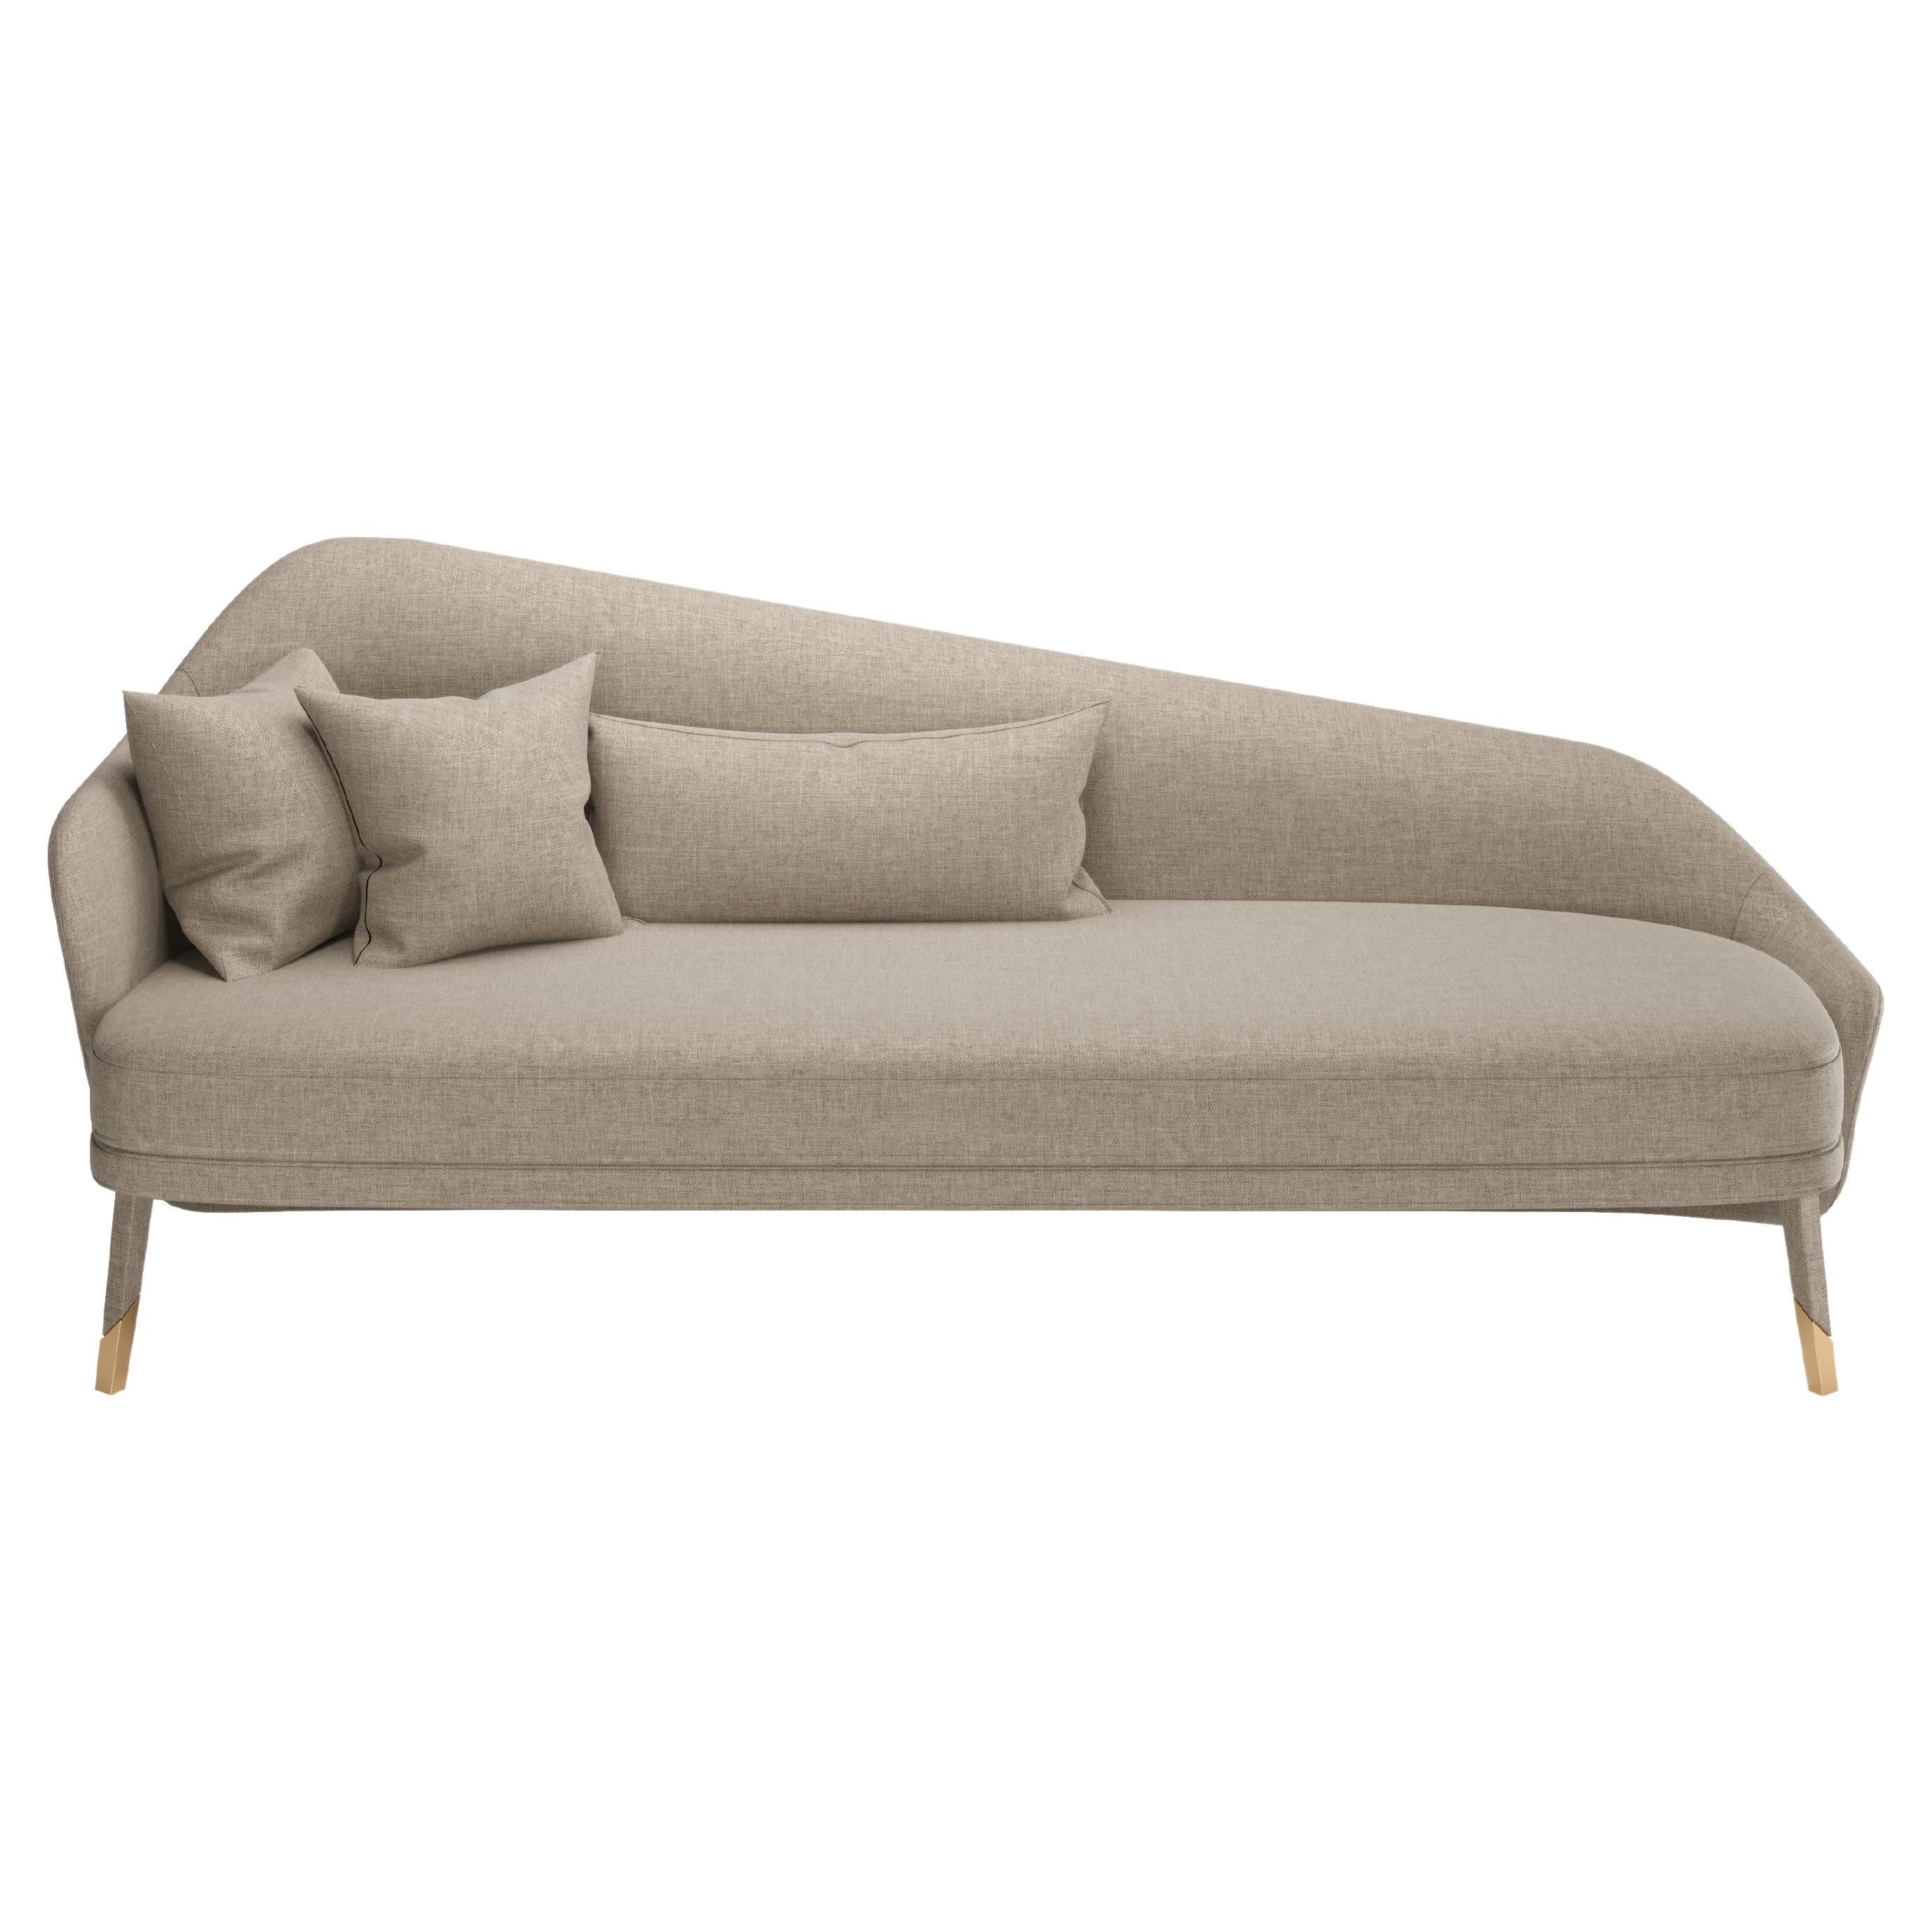 Greige Fabric Modern Bhutan Daybed For Sale